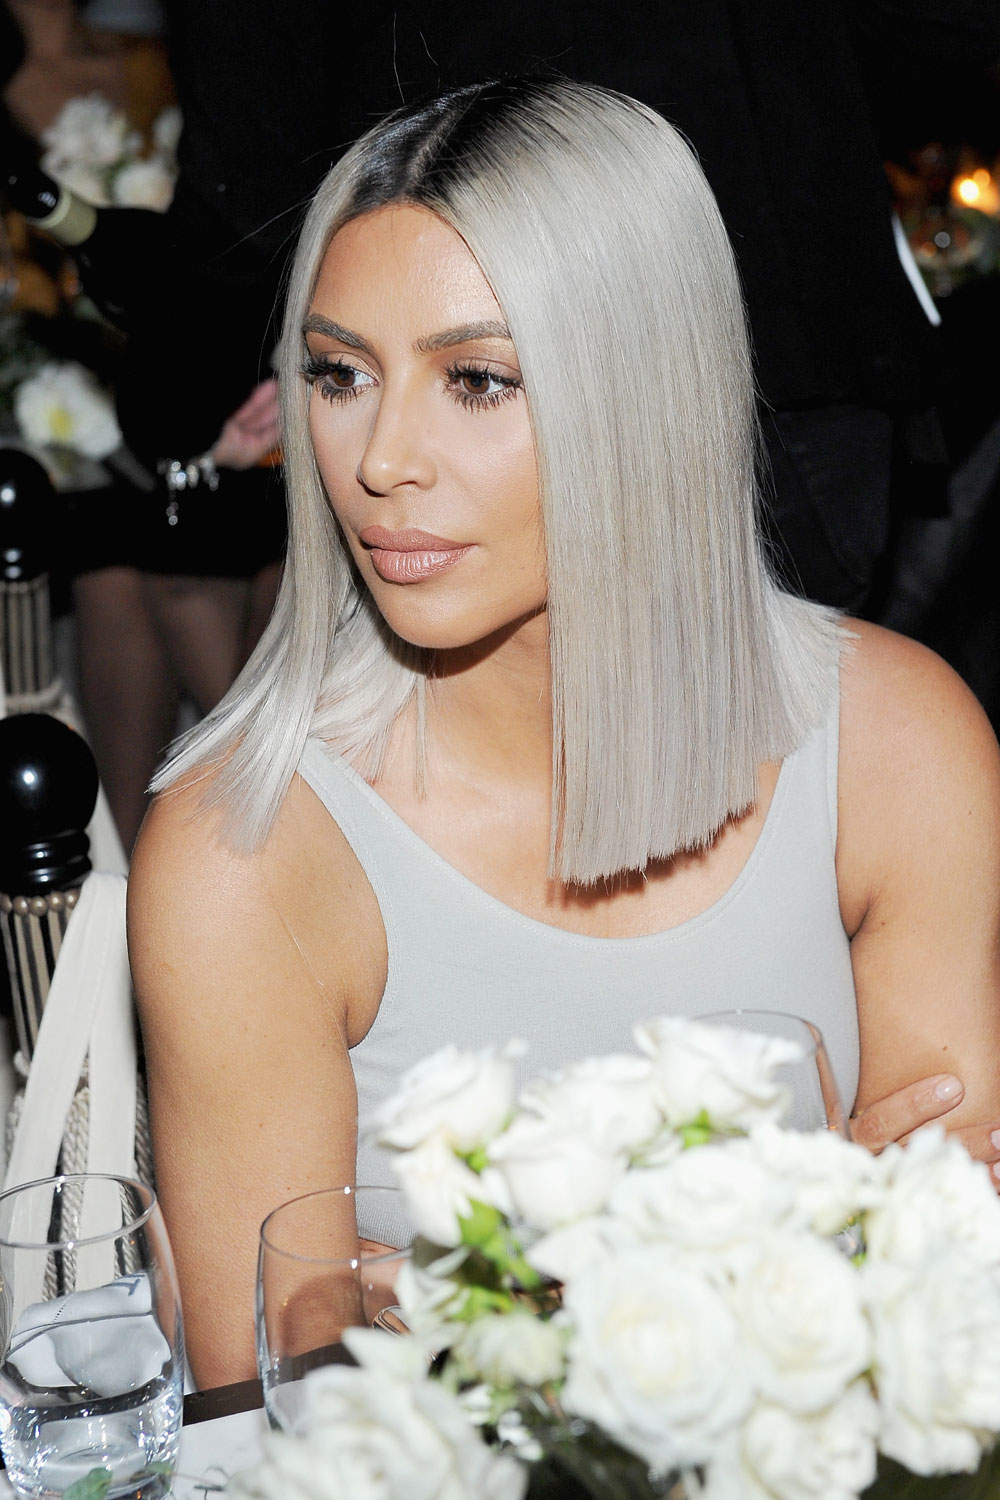 I Have A Theory About Kim Kardashian's Blonde Hair